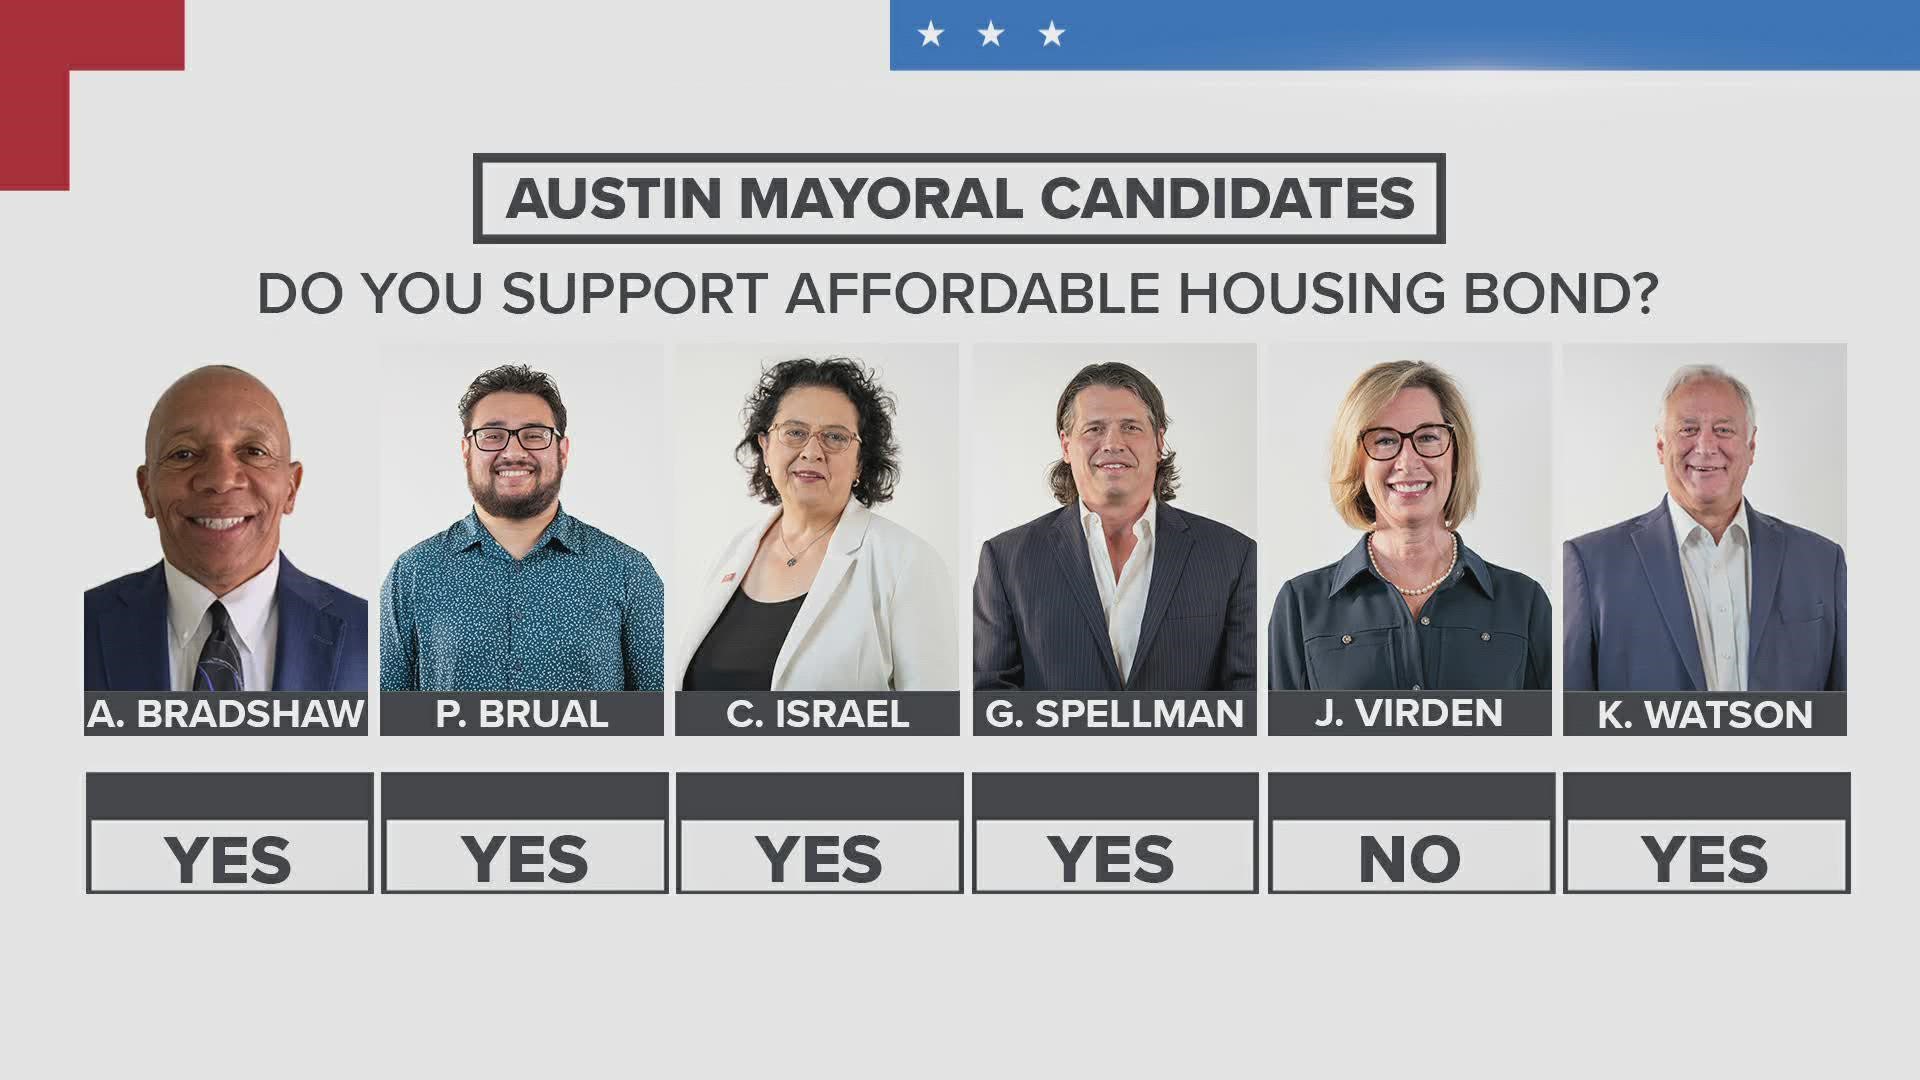 Austin voters will elect a new mayor Tuesday. So, where do the candidates stand on the big issues that are most important to residents?